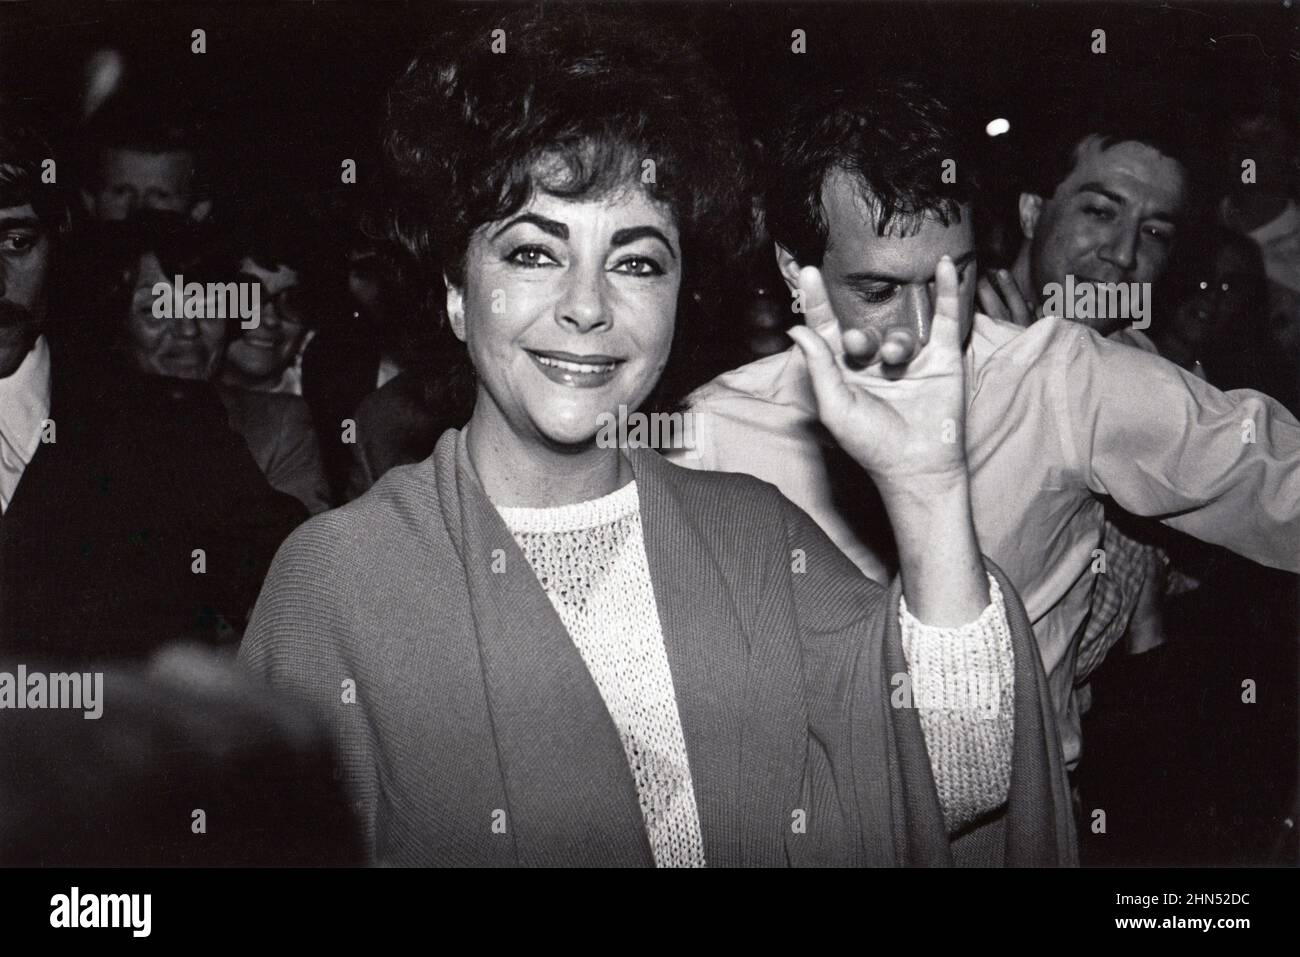 Elizabeth Taylor leaving the Lunt-Fontanne Theater in Manhattan after a performance of Private Lives. Richard Burton was her co-star. In Manhattan, NYC, 1983. Stock Photo